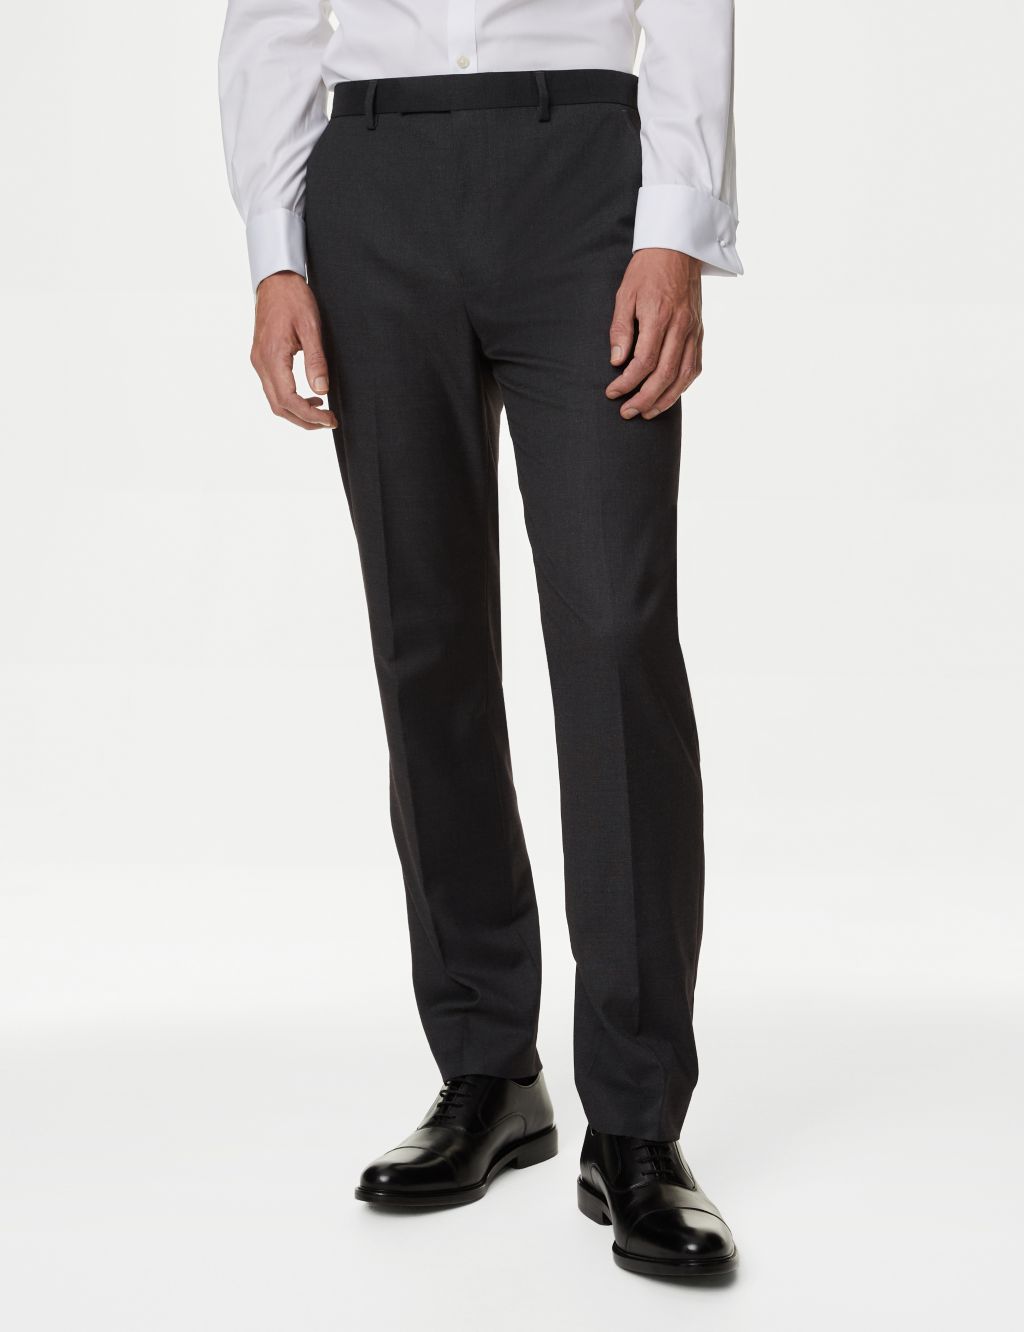 Regular Fit Stretch Suit Trousers image 1